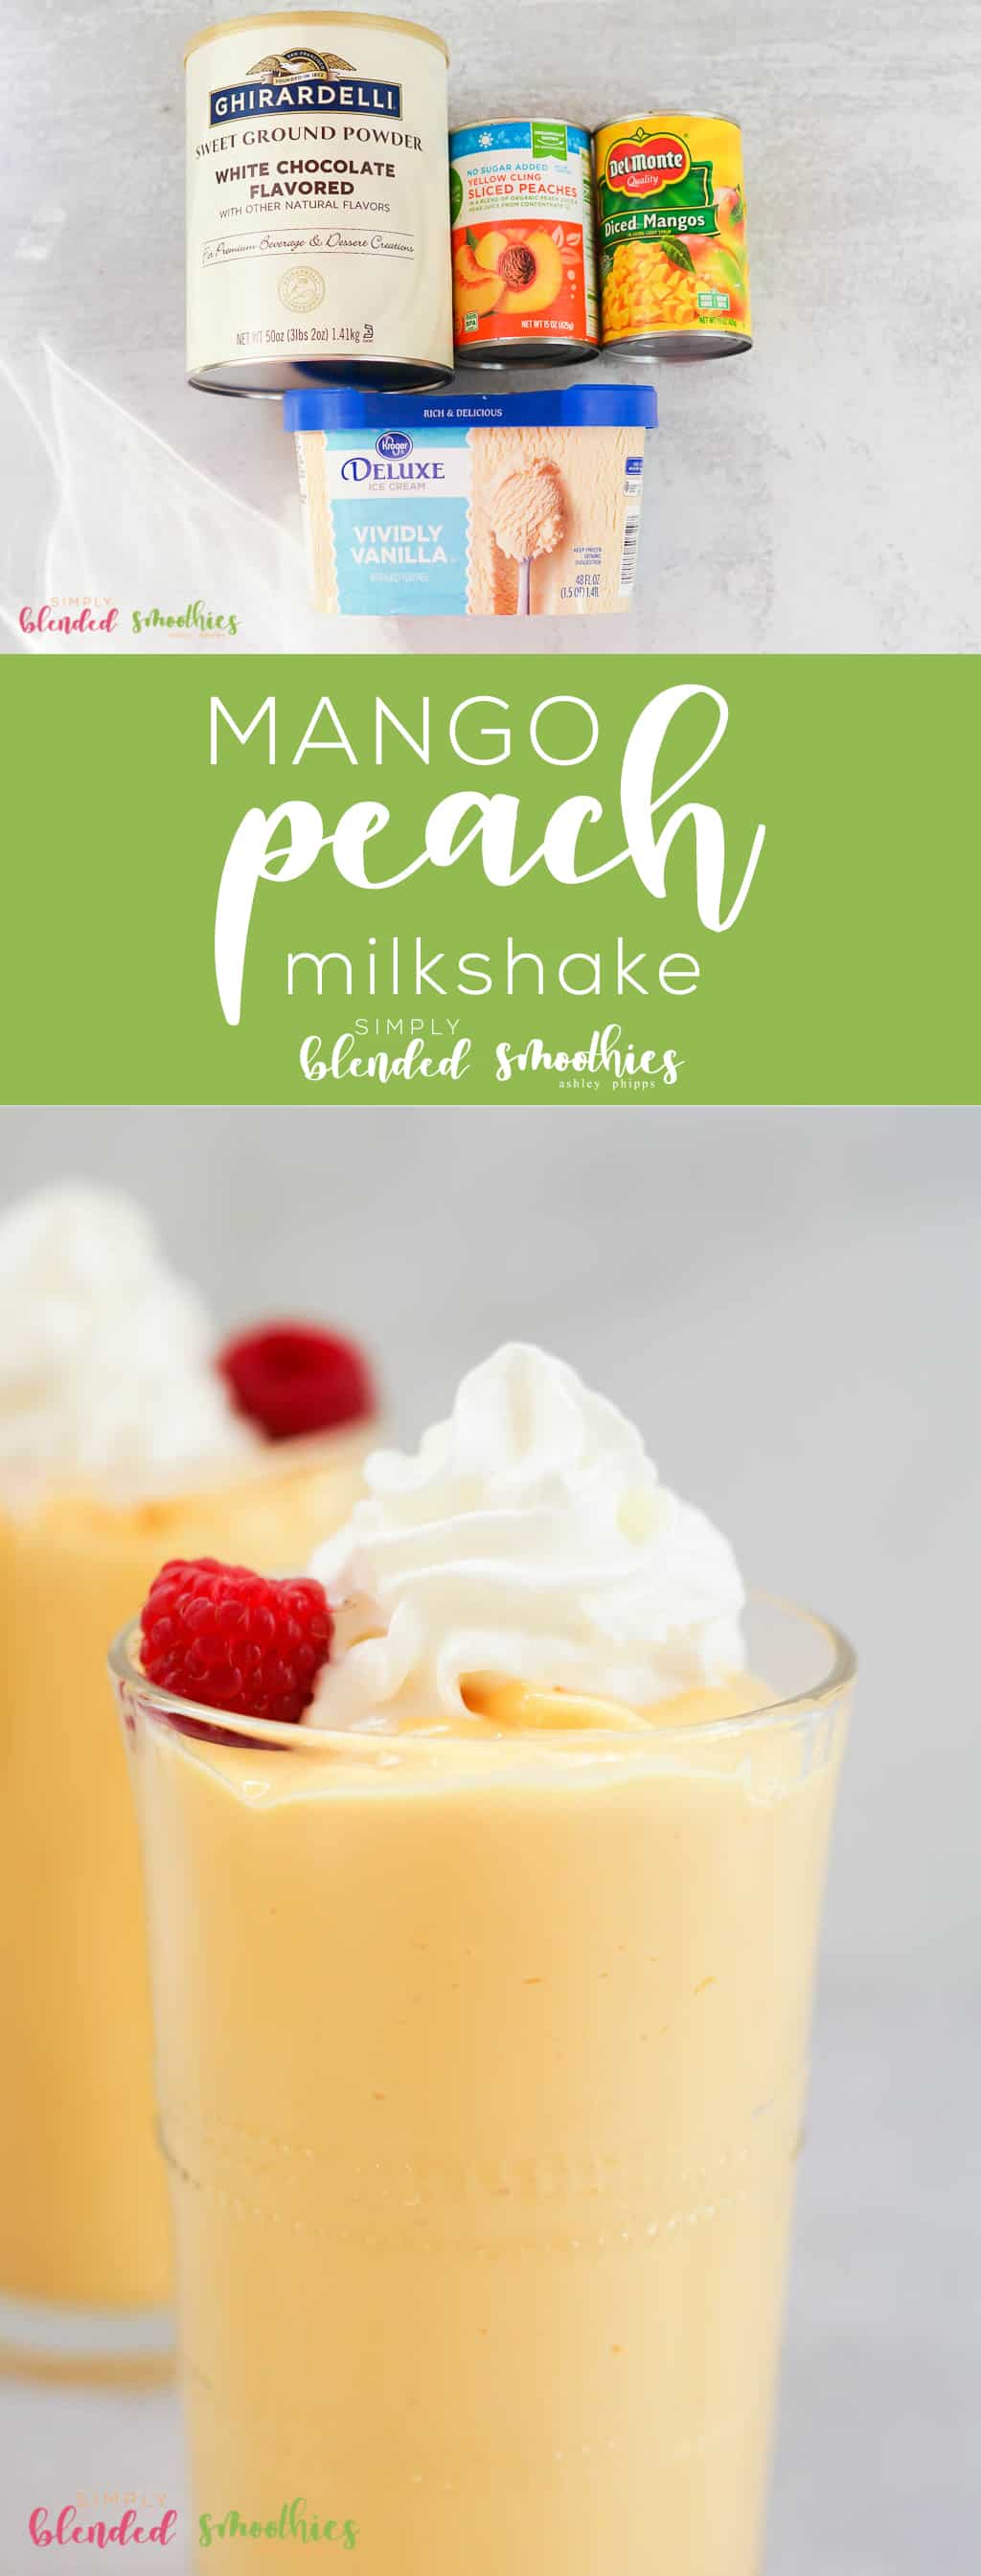 This Mango Peach Milkshake Is A Delicious Treat Perfect That You Can Make In Your Home During The Summertime Or Any Time Of Year